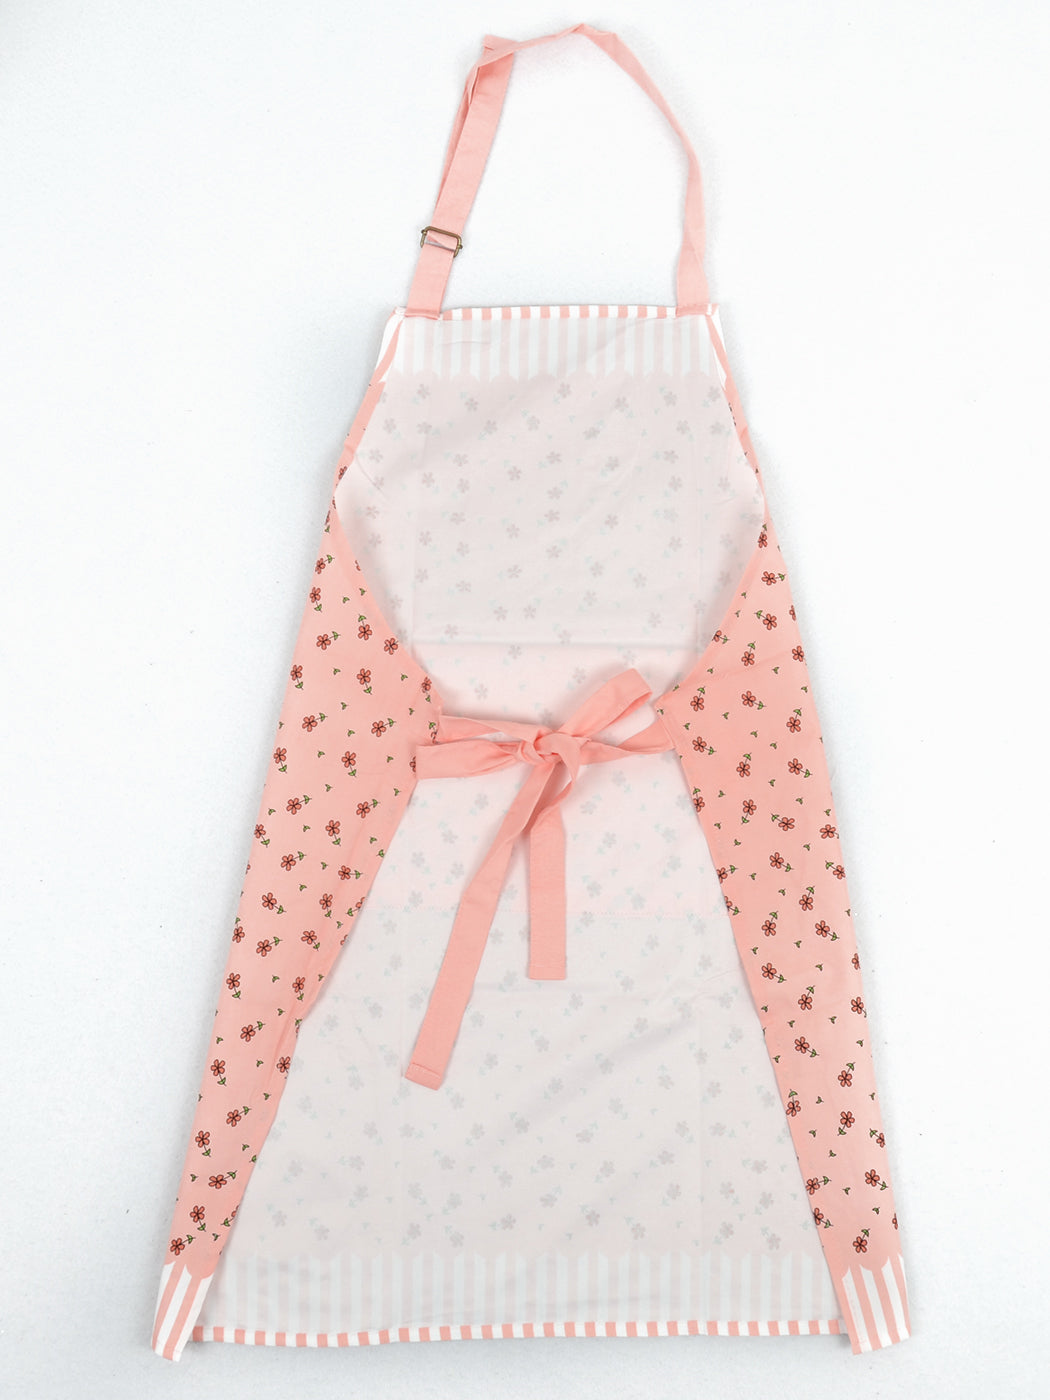 Cute Cotton Women Aprons with Pockets